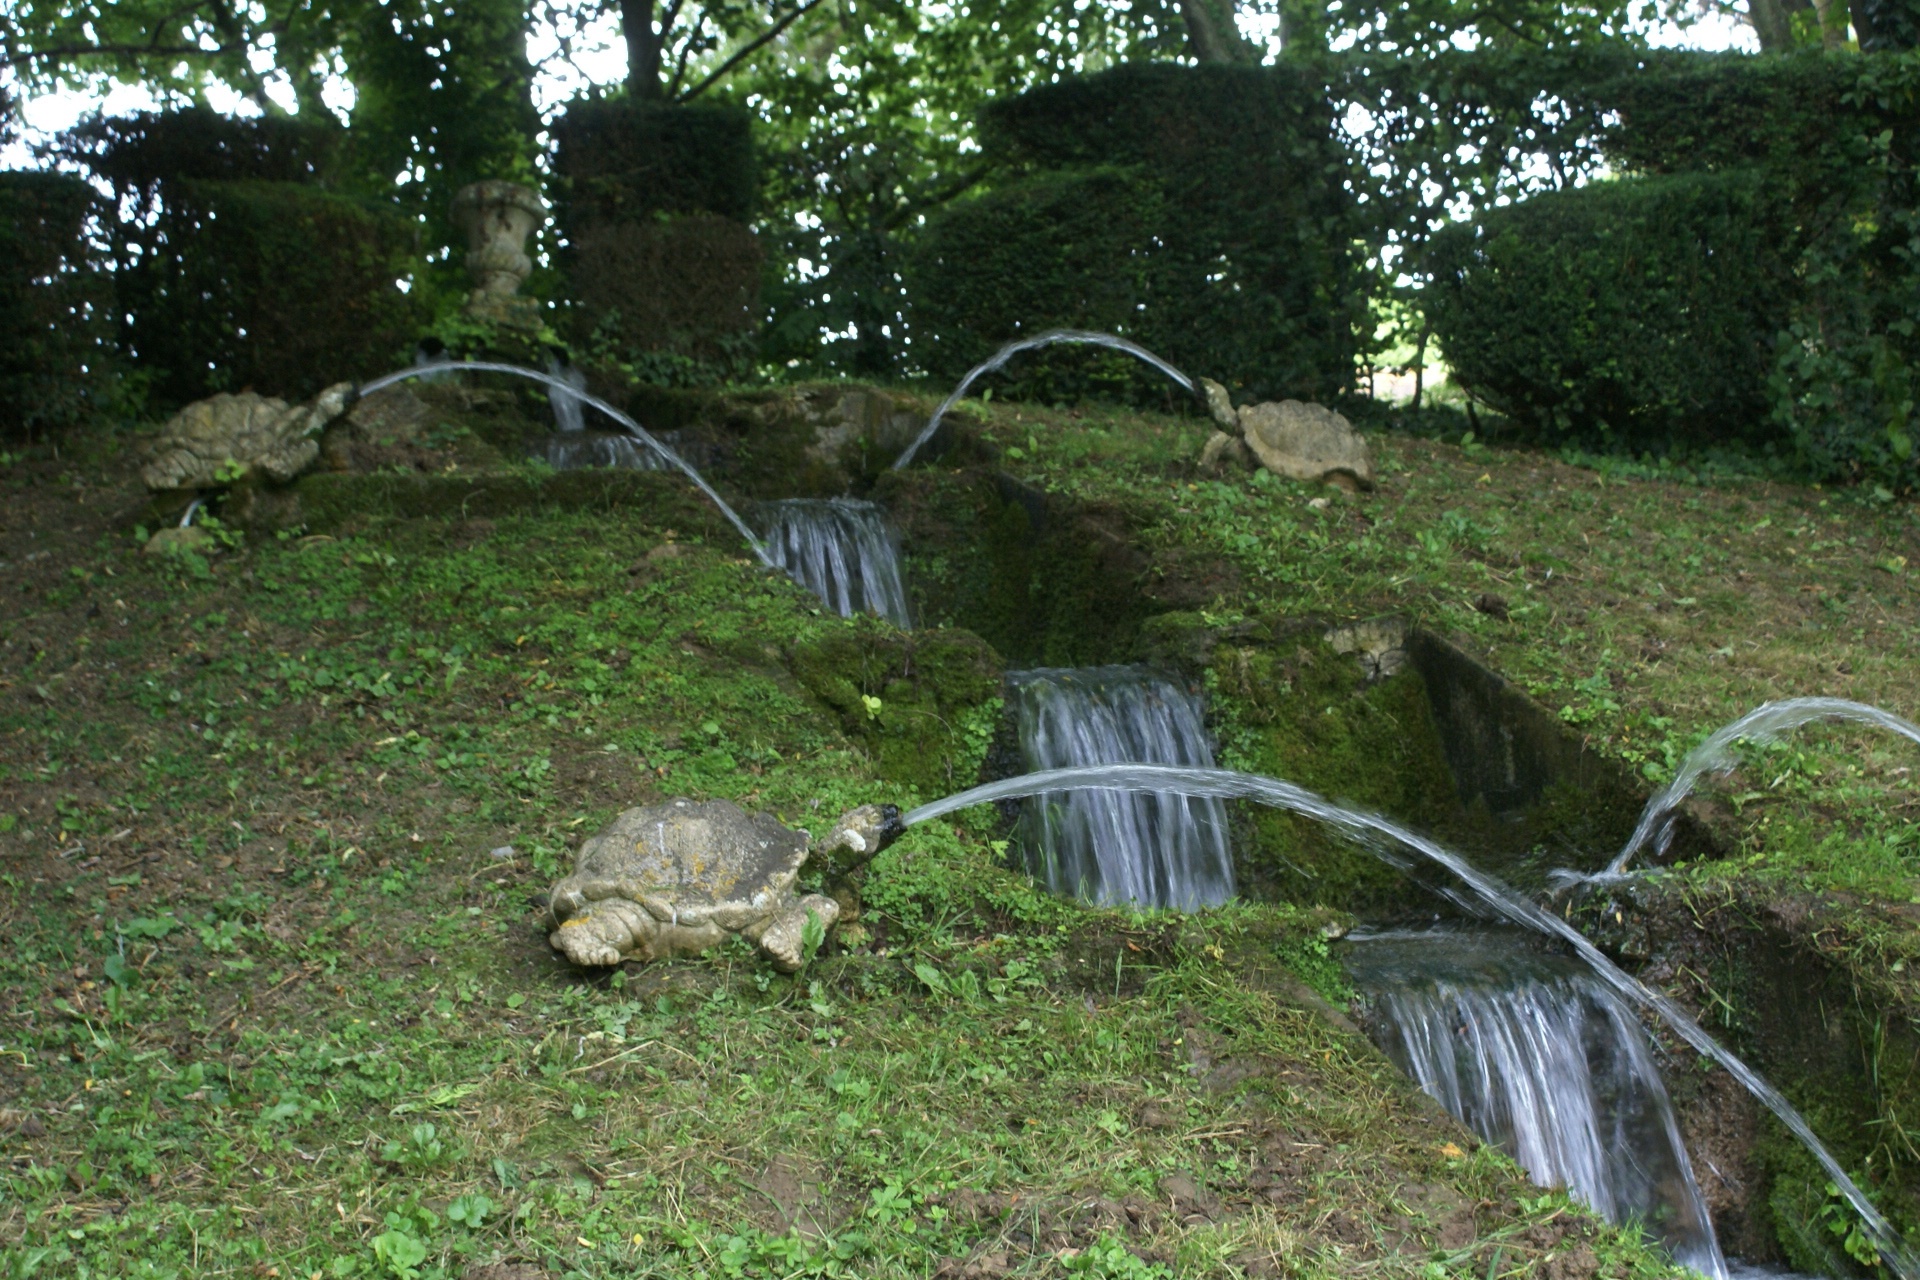 The water garden at the Château de Vendeuvre in the Calvados region of Normandy